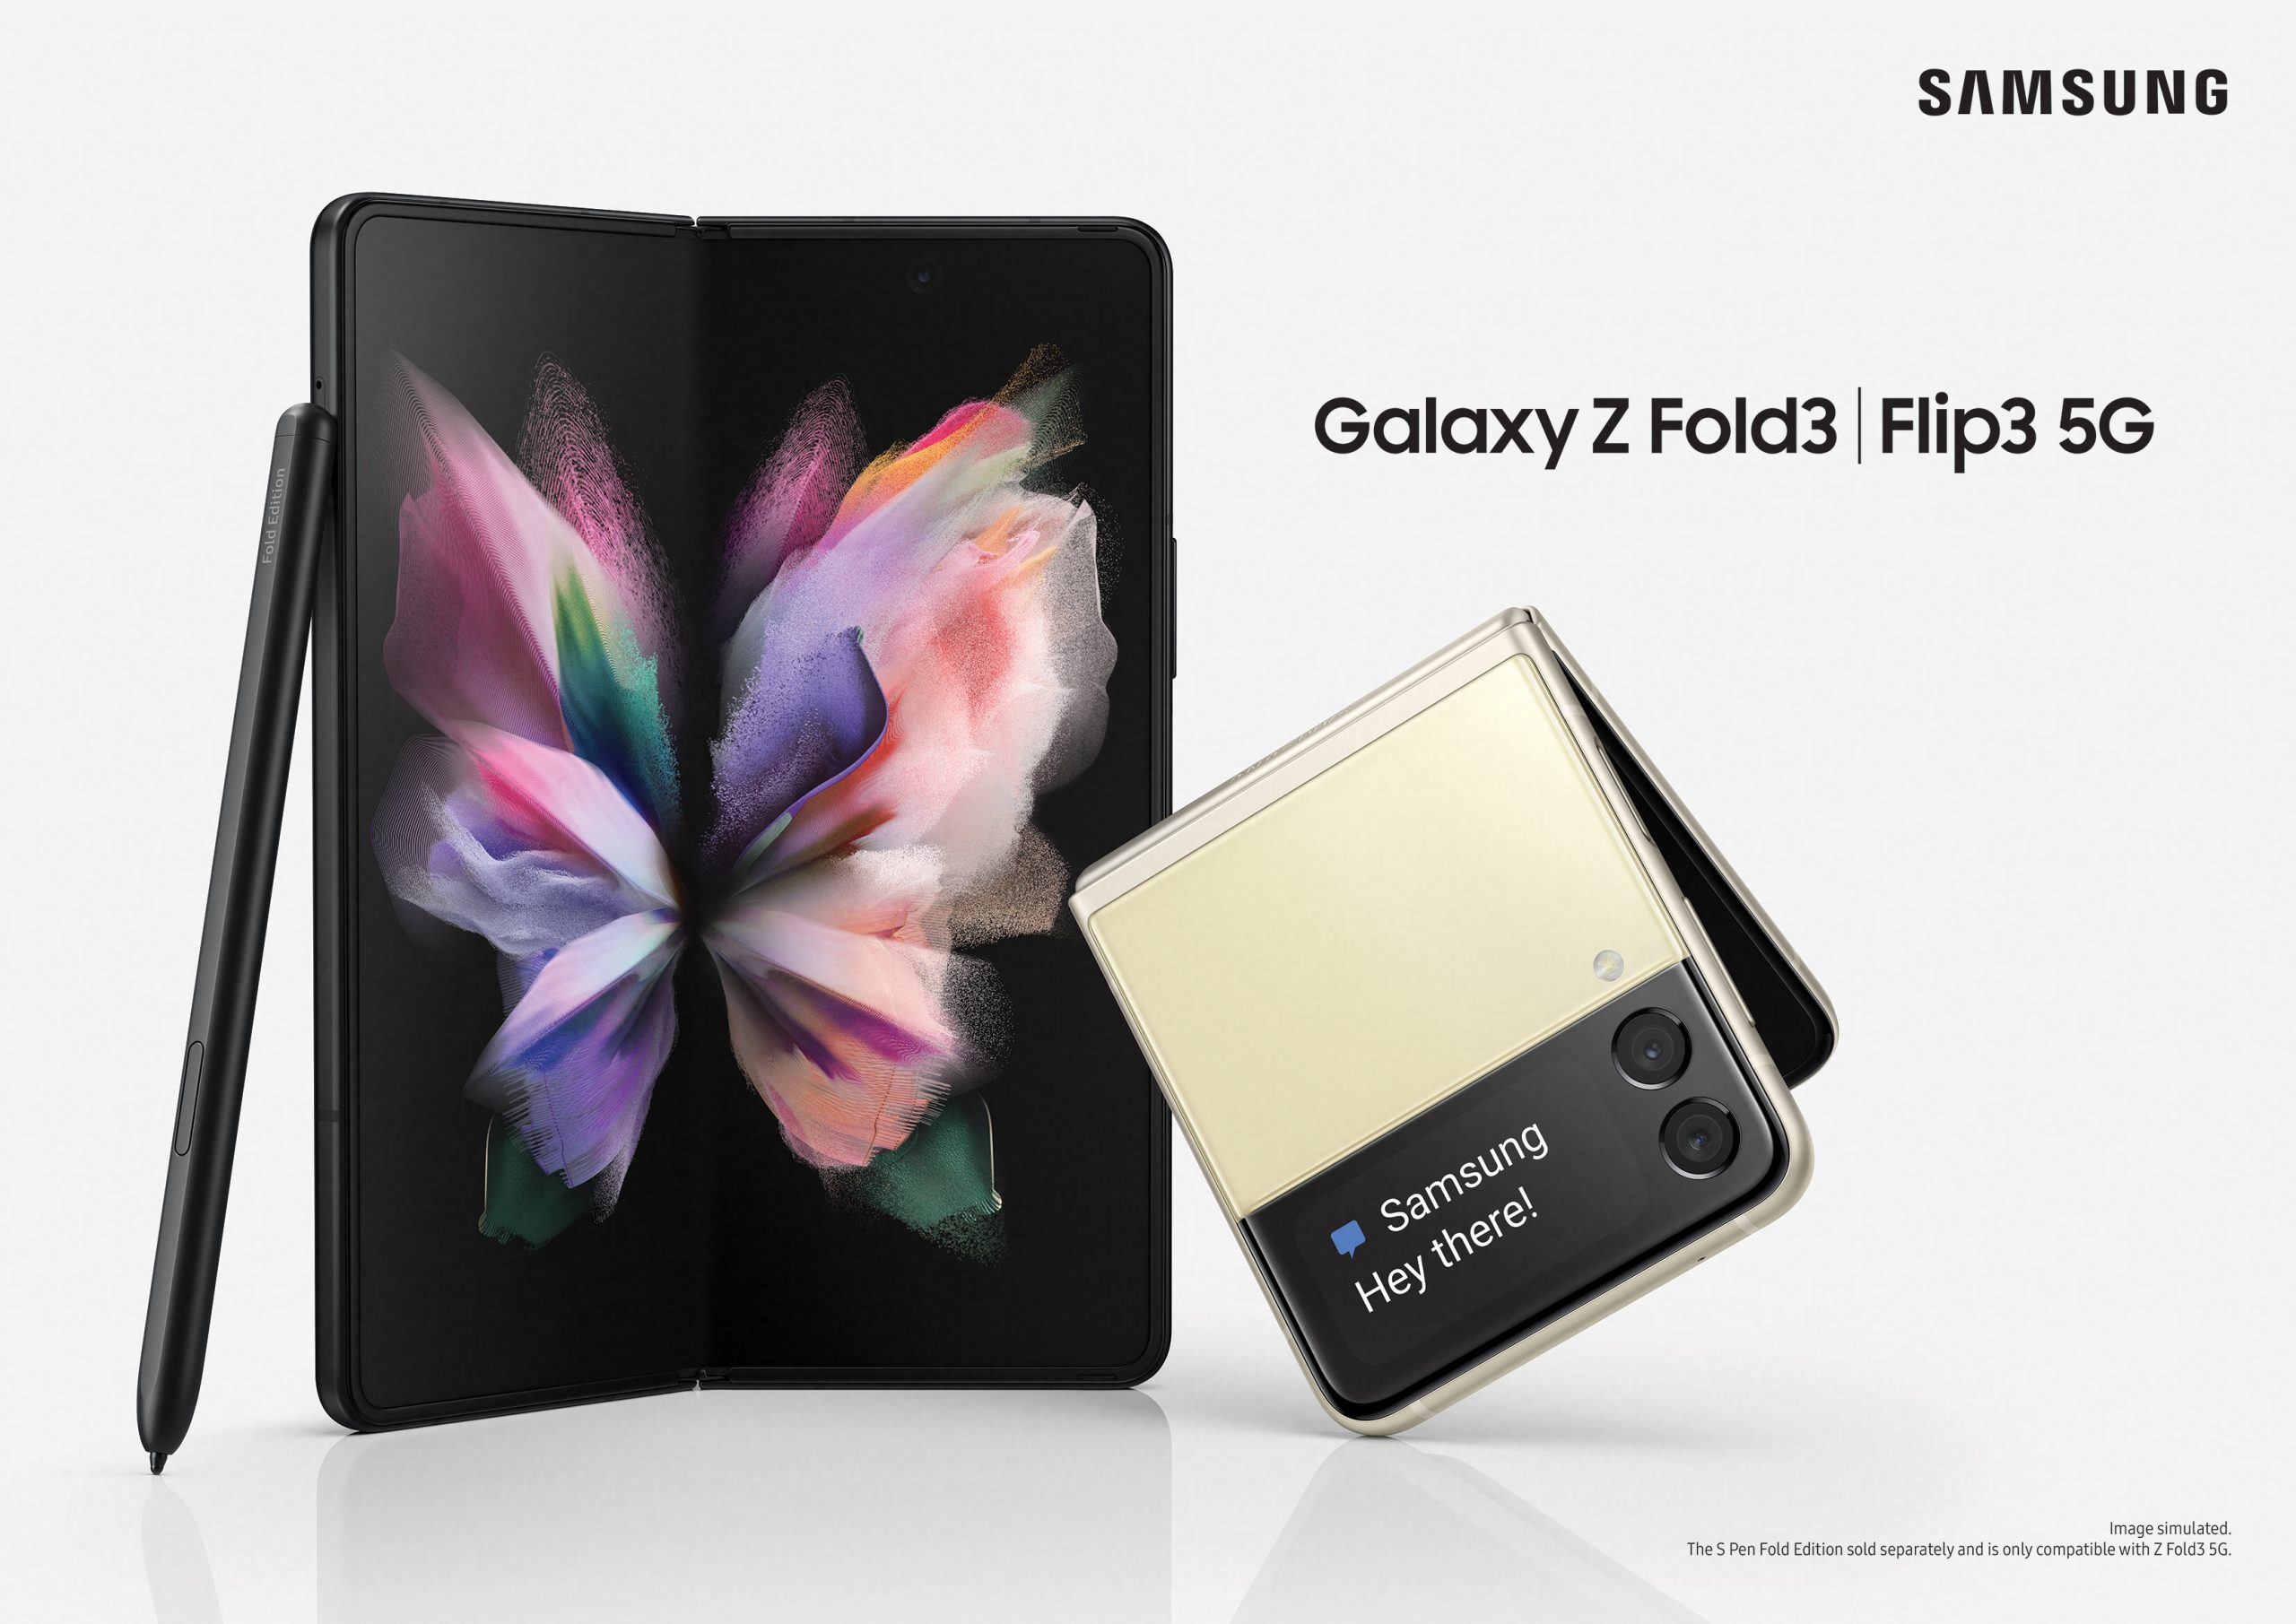 Samsung Galaxy Z Fold 3 with under panel camera and Z Flip 3 with 